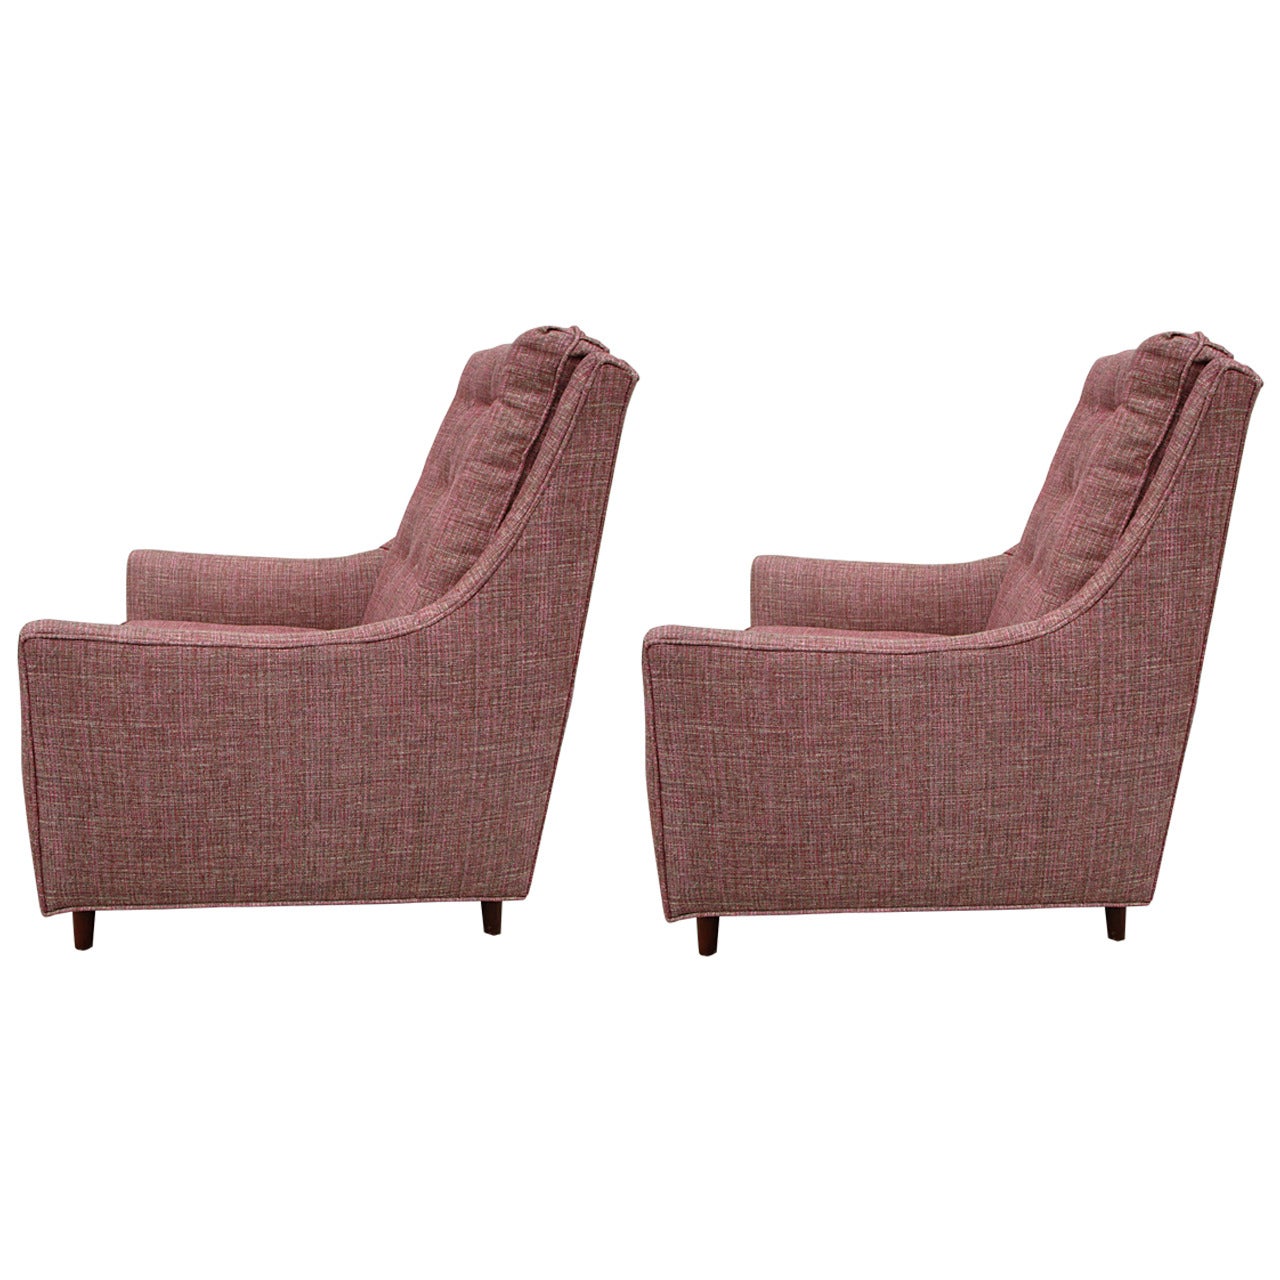 Pair of High Back Lounge Chairs with Ottoman